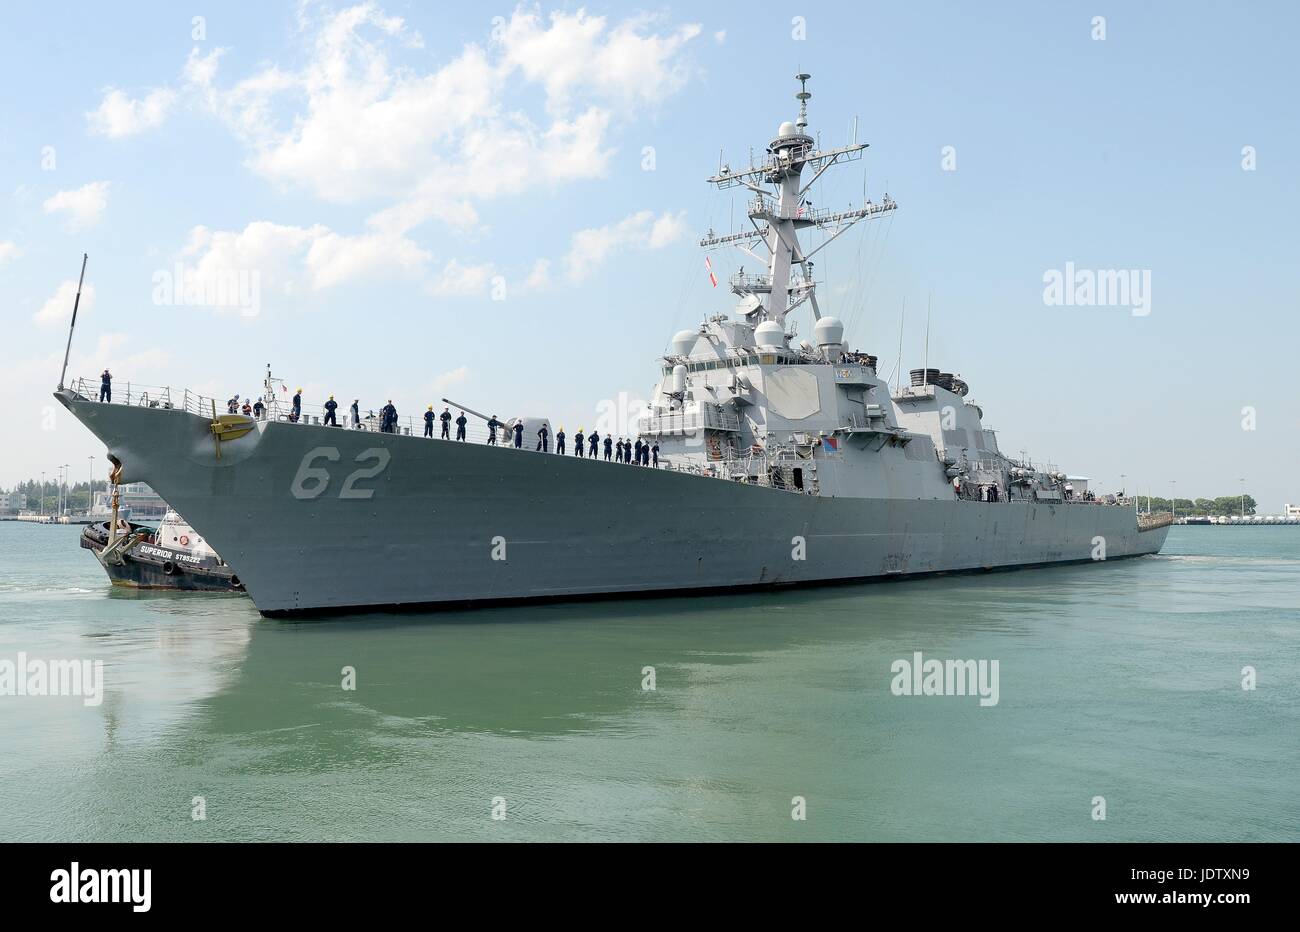 The U.S Navy Arleigh Burke-class guided missile destroyer USS Fitzgerald departs Changi Naval Base during CARAT Singapore 2013 training exercise July 21, 2013 in Singapore. Stock Photo